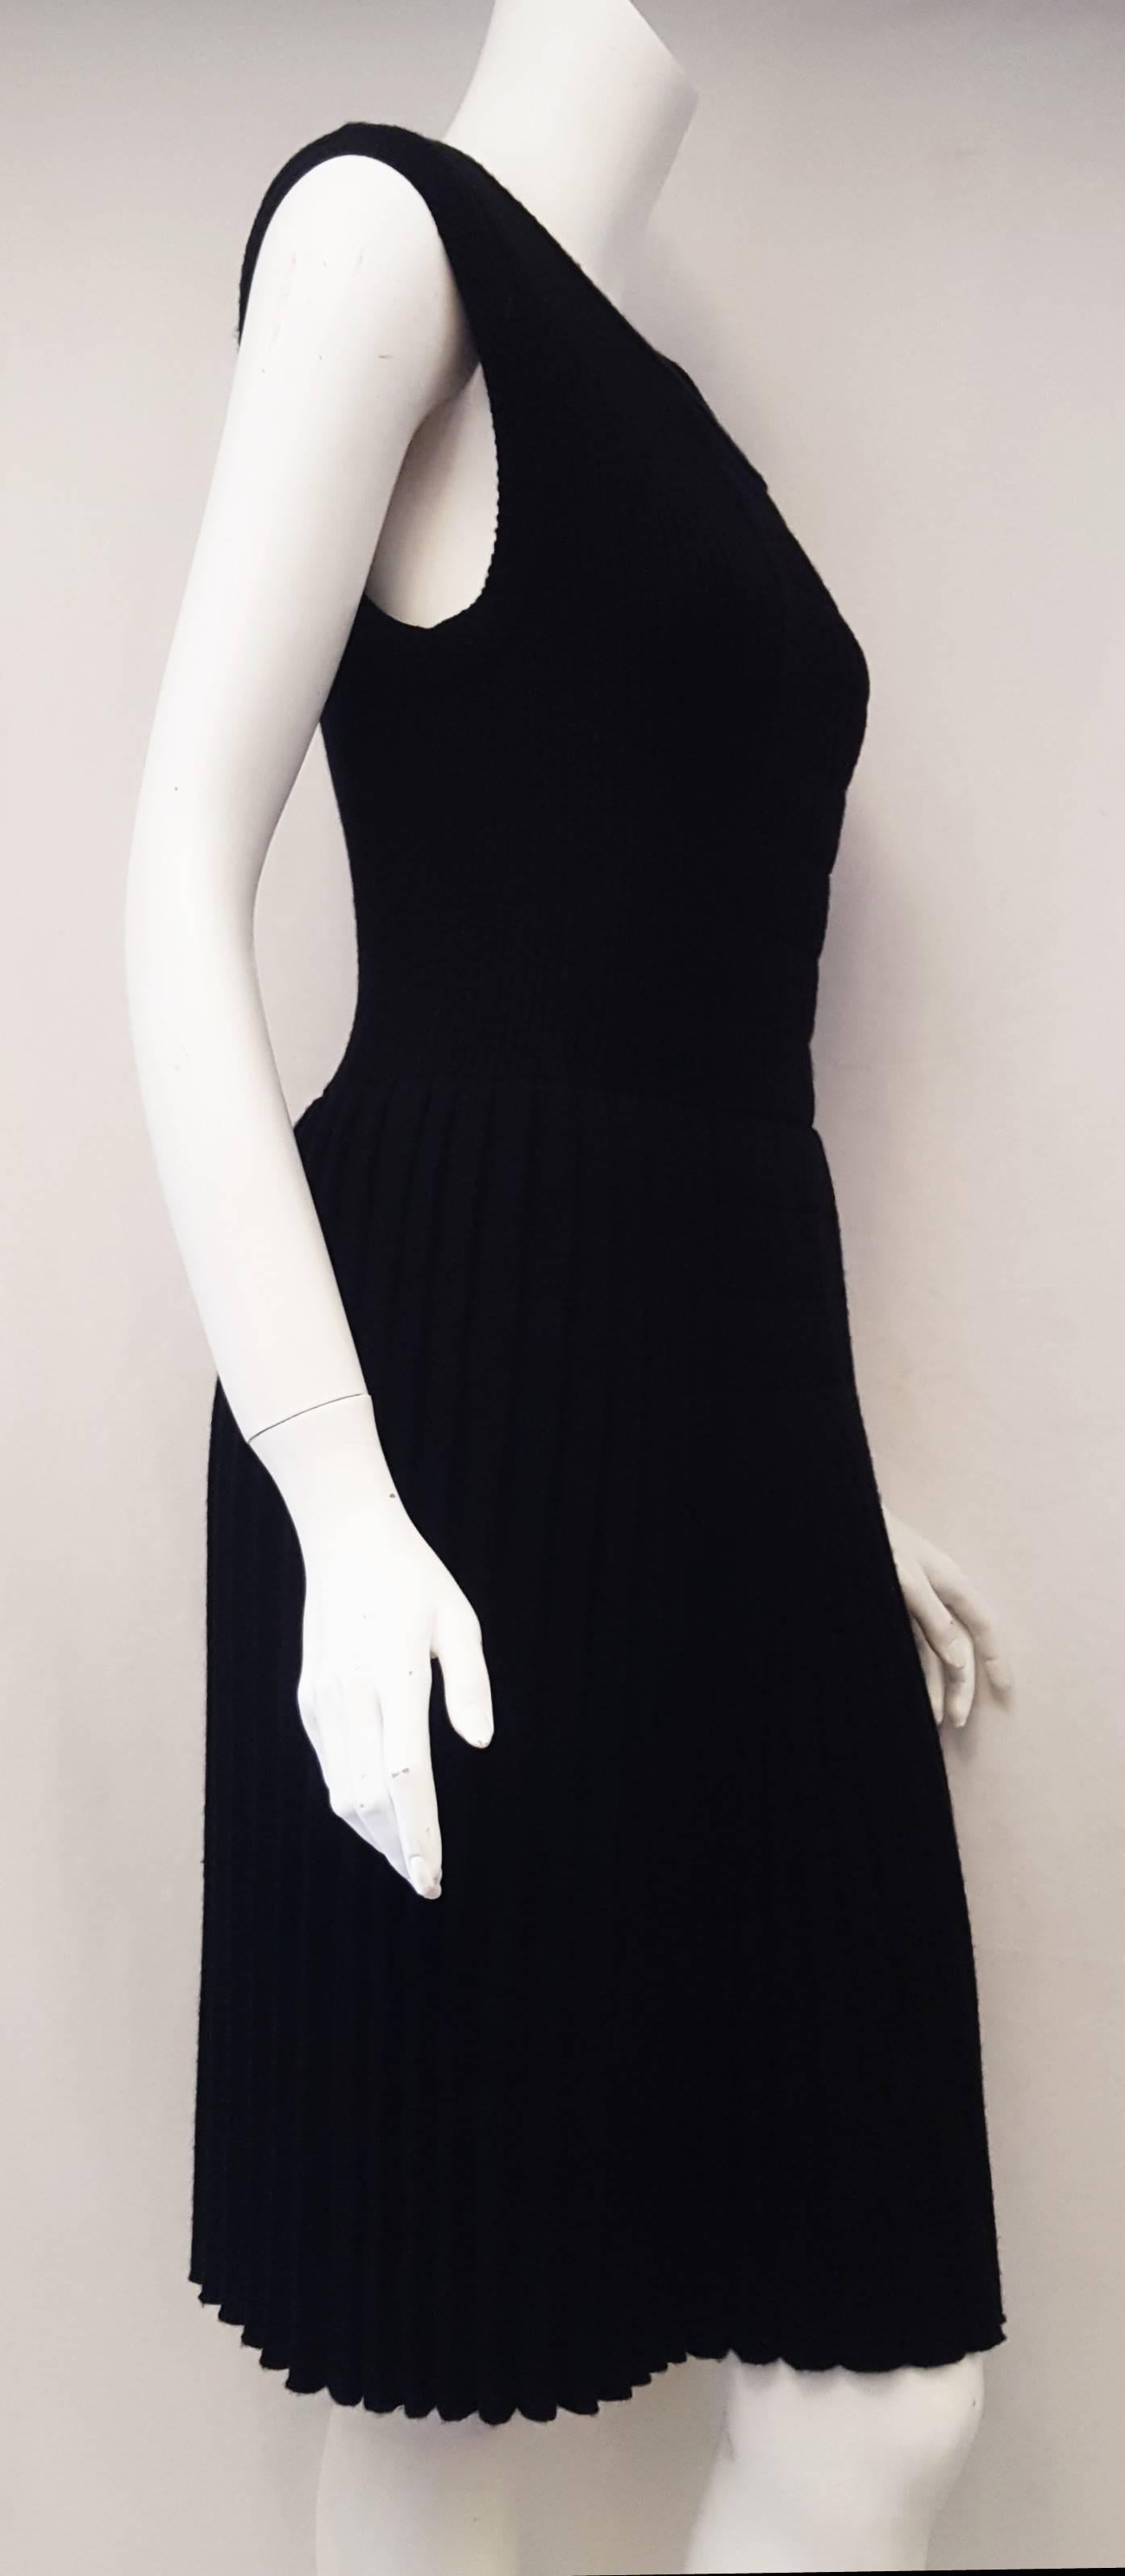 This Chanel dress from the fall 2007 collection, features a pullover style black wool knit sleeveless dress that contains no zipper or buttons. The top has a scoop neck and a decorative central pleated panel of same wool knit with slight drop waist